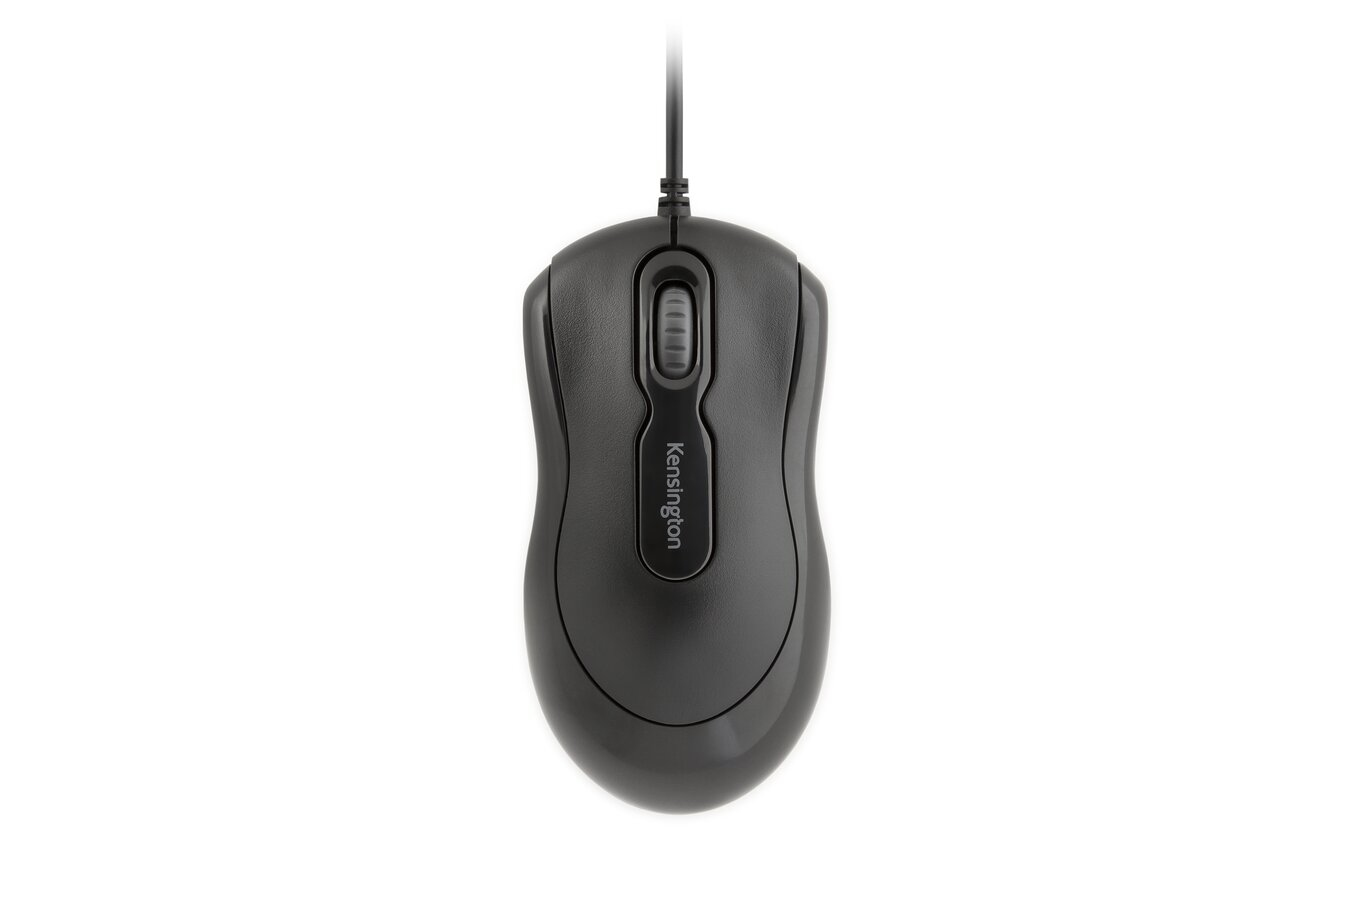 Kensington Mouse - in - a - Box® Wired